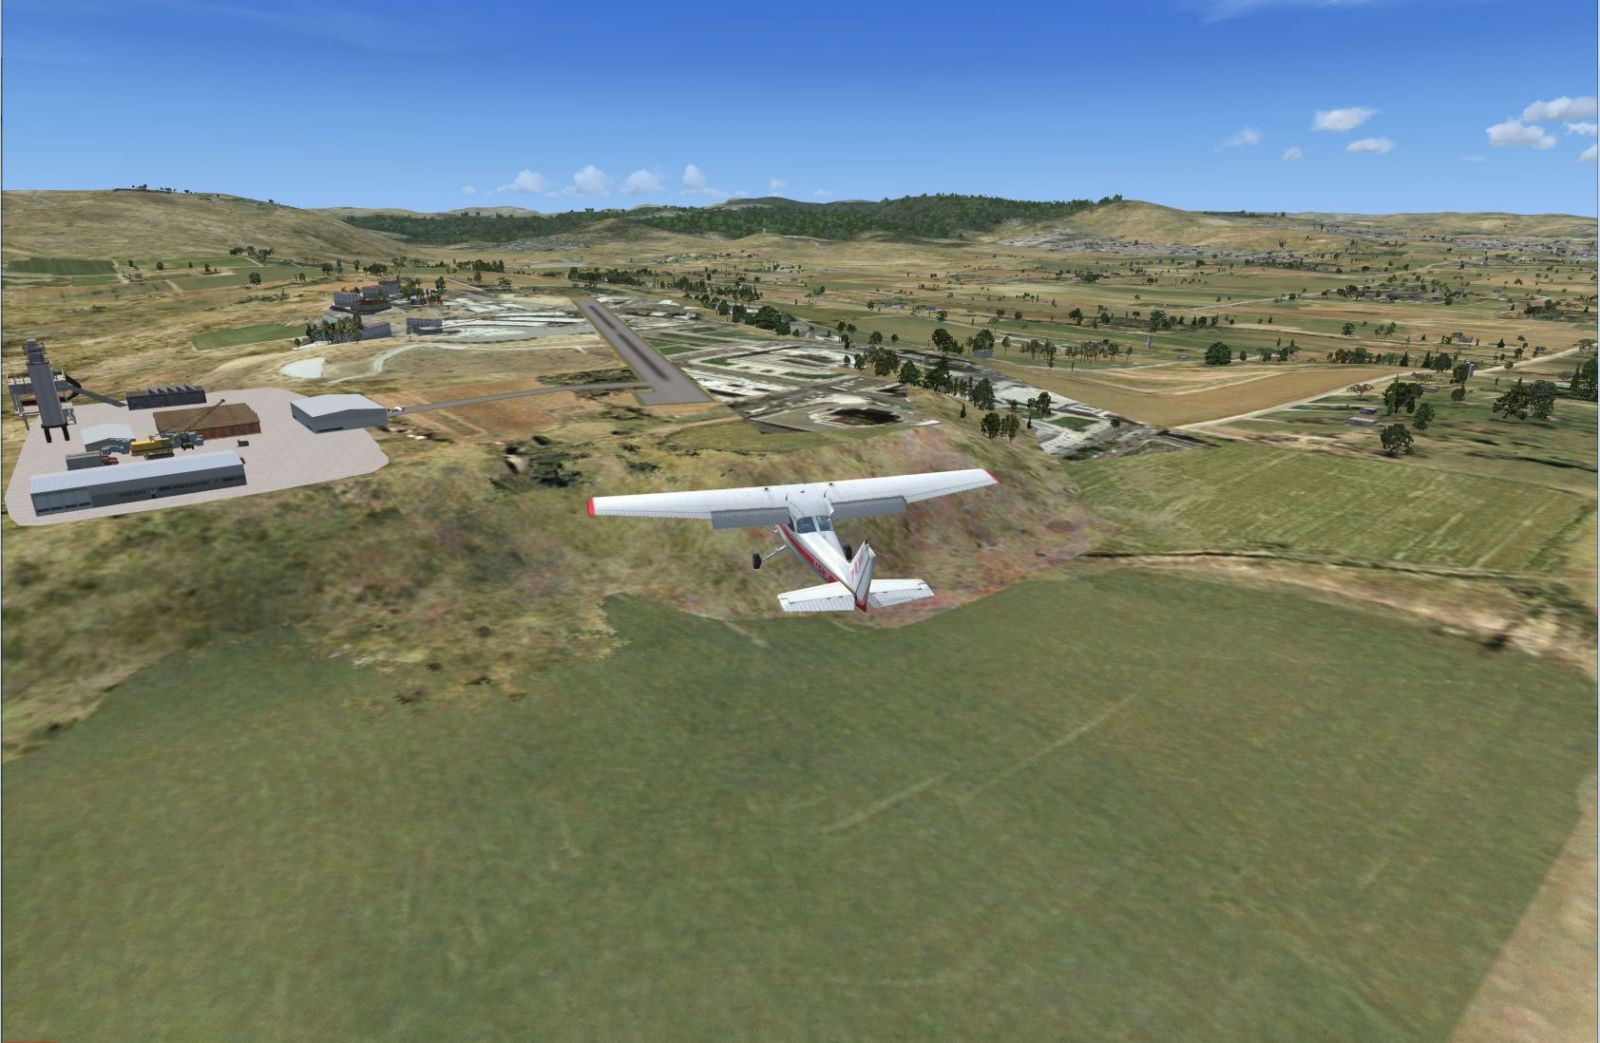 FSX Cyclone Airstrip In Israel Scenery